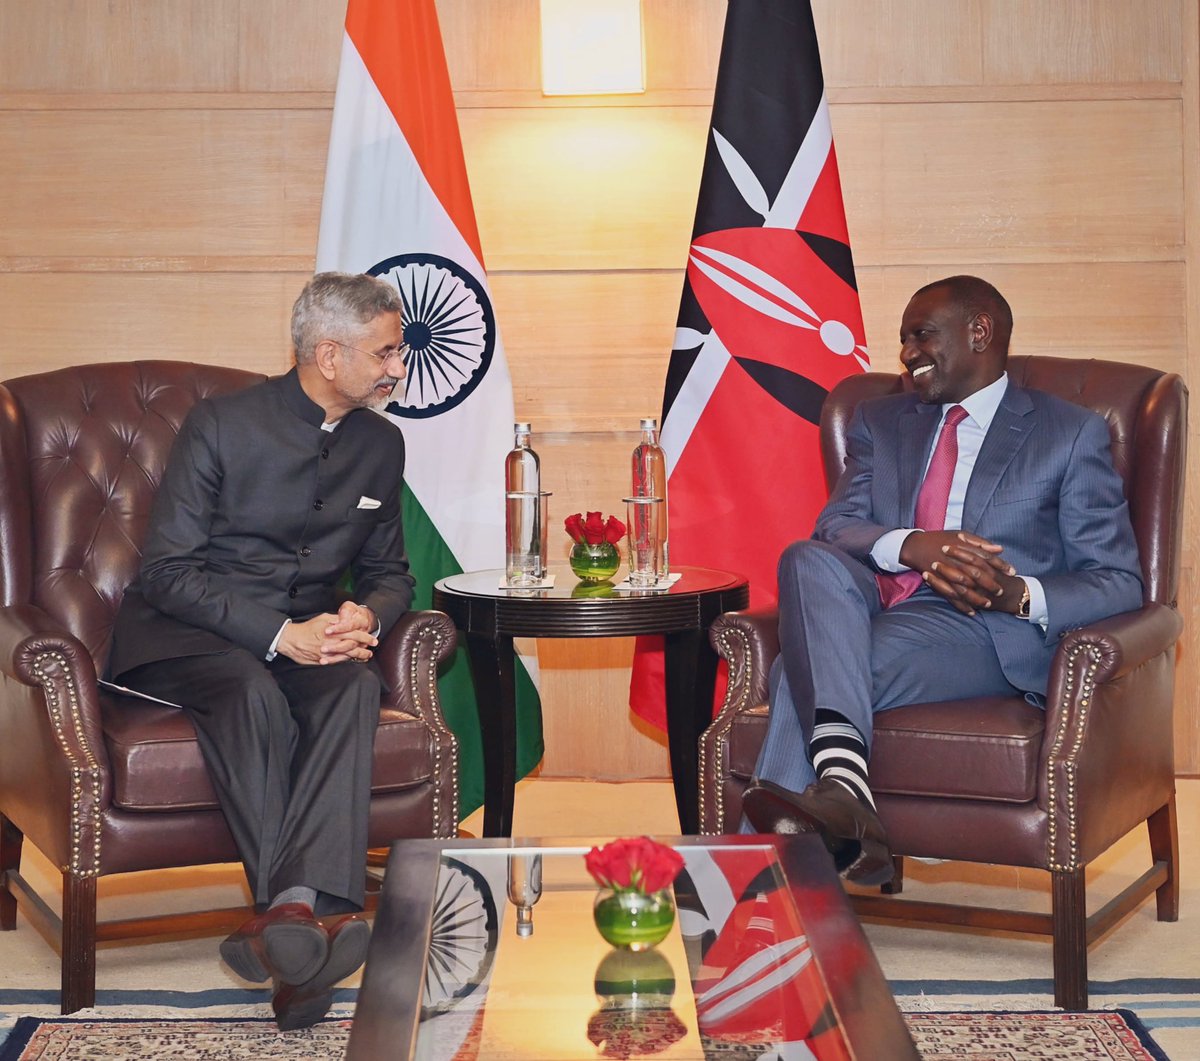 Honored to call on Kenyan President @WilliamsRuto at the start of his State Visit. Appreciated his perspectives on the concerns of the Global South. Valued his insights for the further strengthening of our bilateral ties.